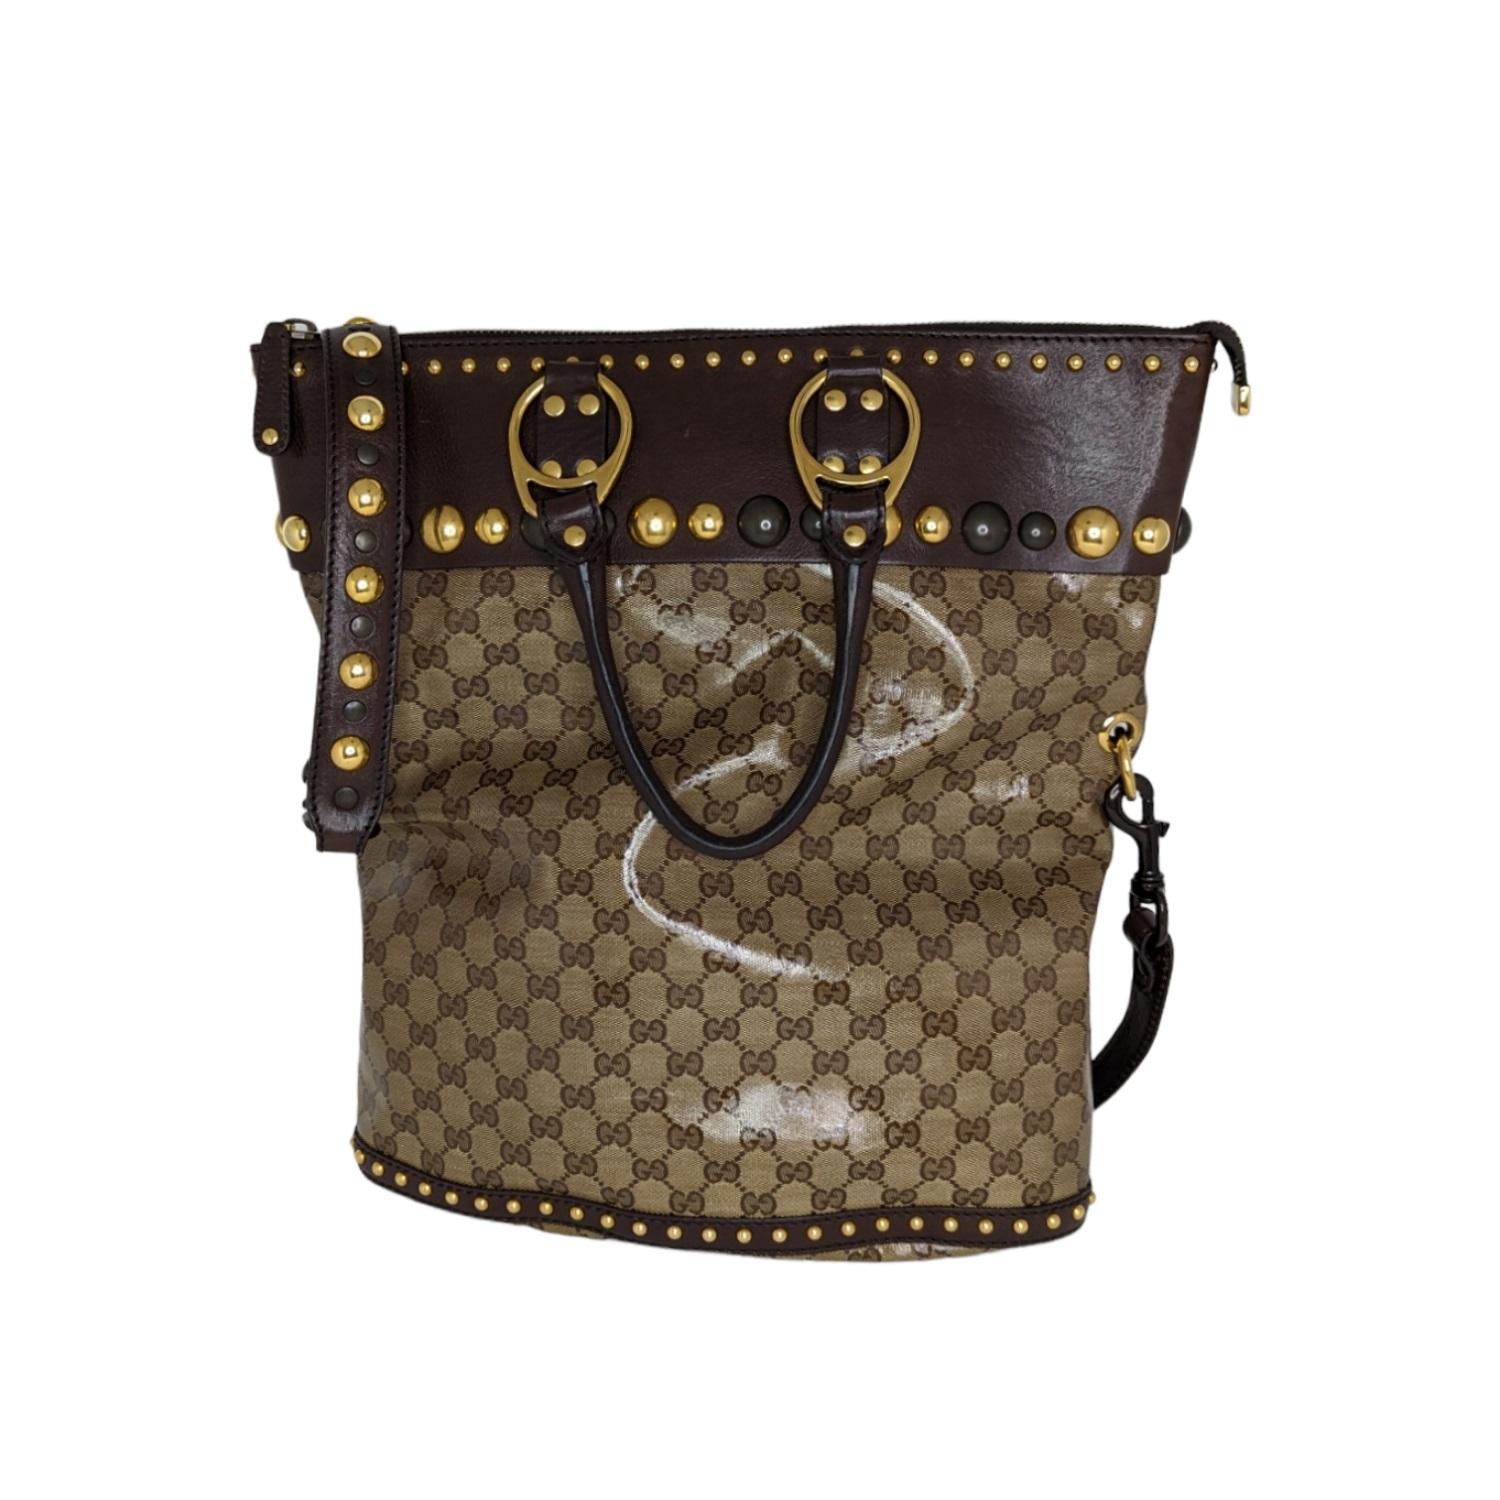 Make a bold statement with this top handle handbag from Gucci's Babouska collection. Crafted from coated GG monogram canvas with brown leather trim, the exterior is accented with large round studs and dual rolled handles. Its plaid fabric lined